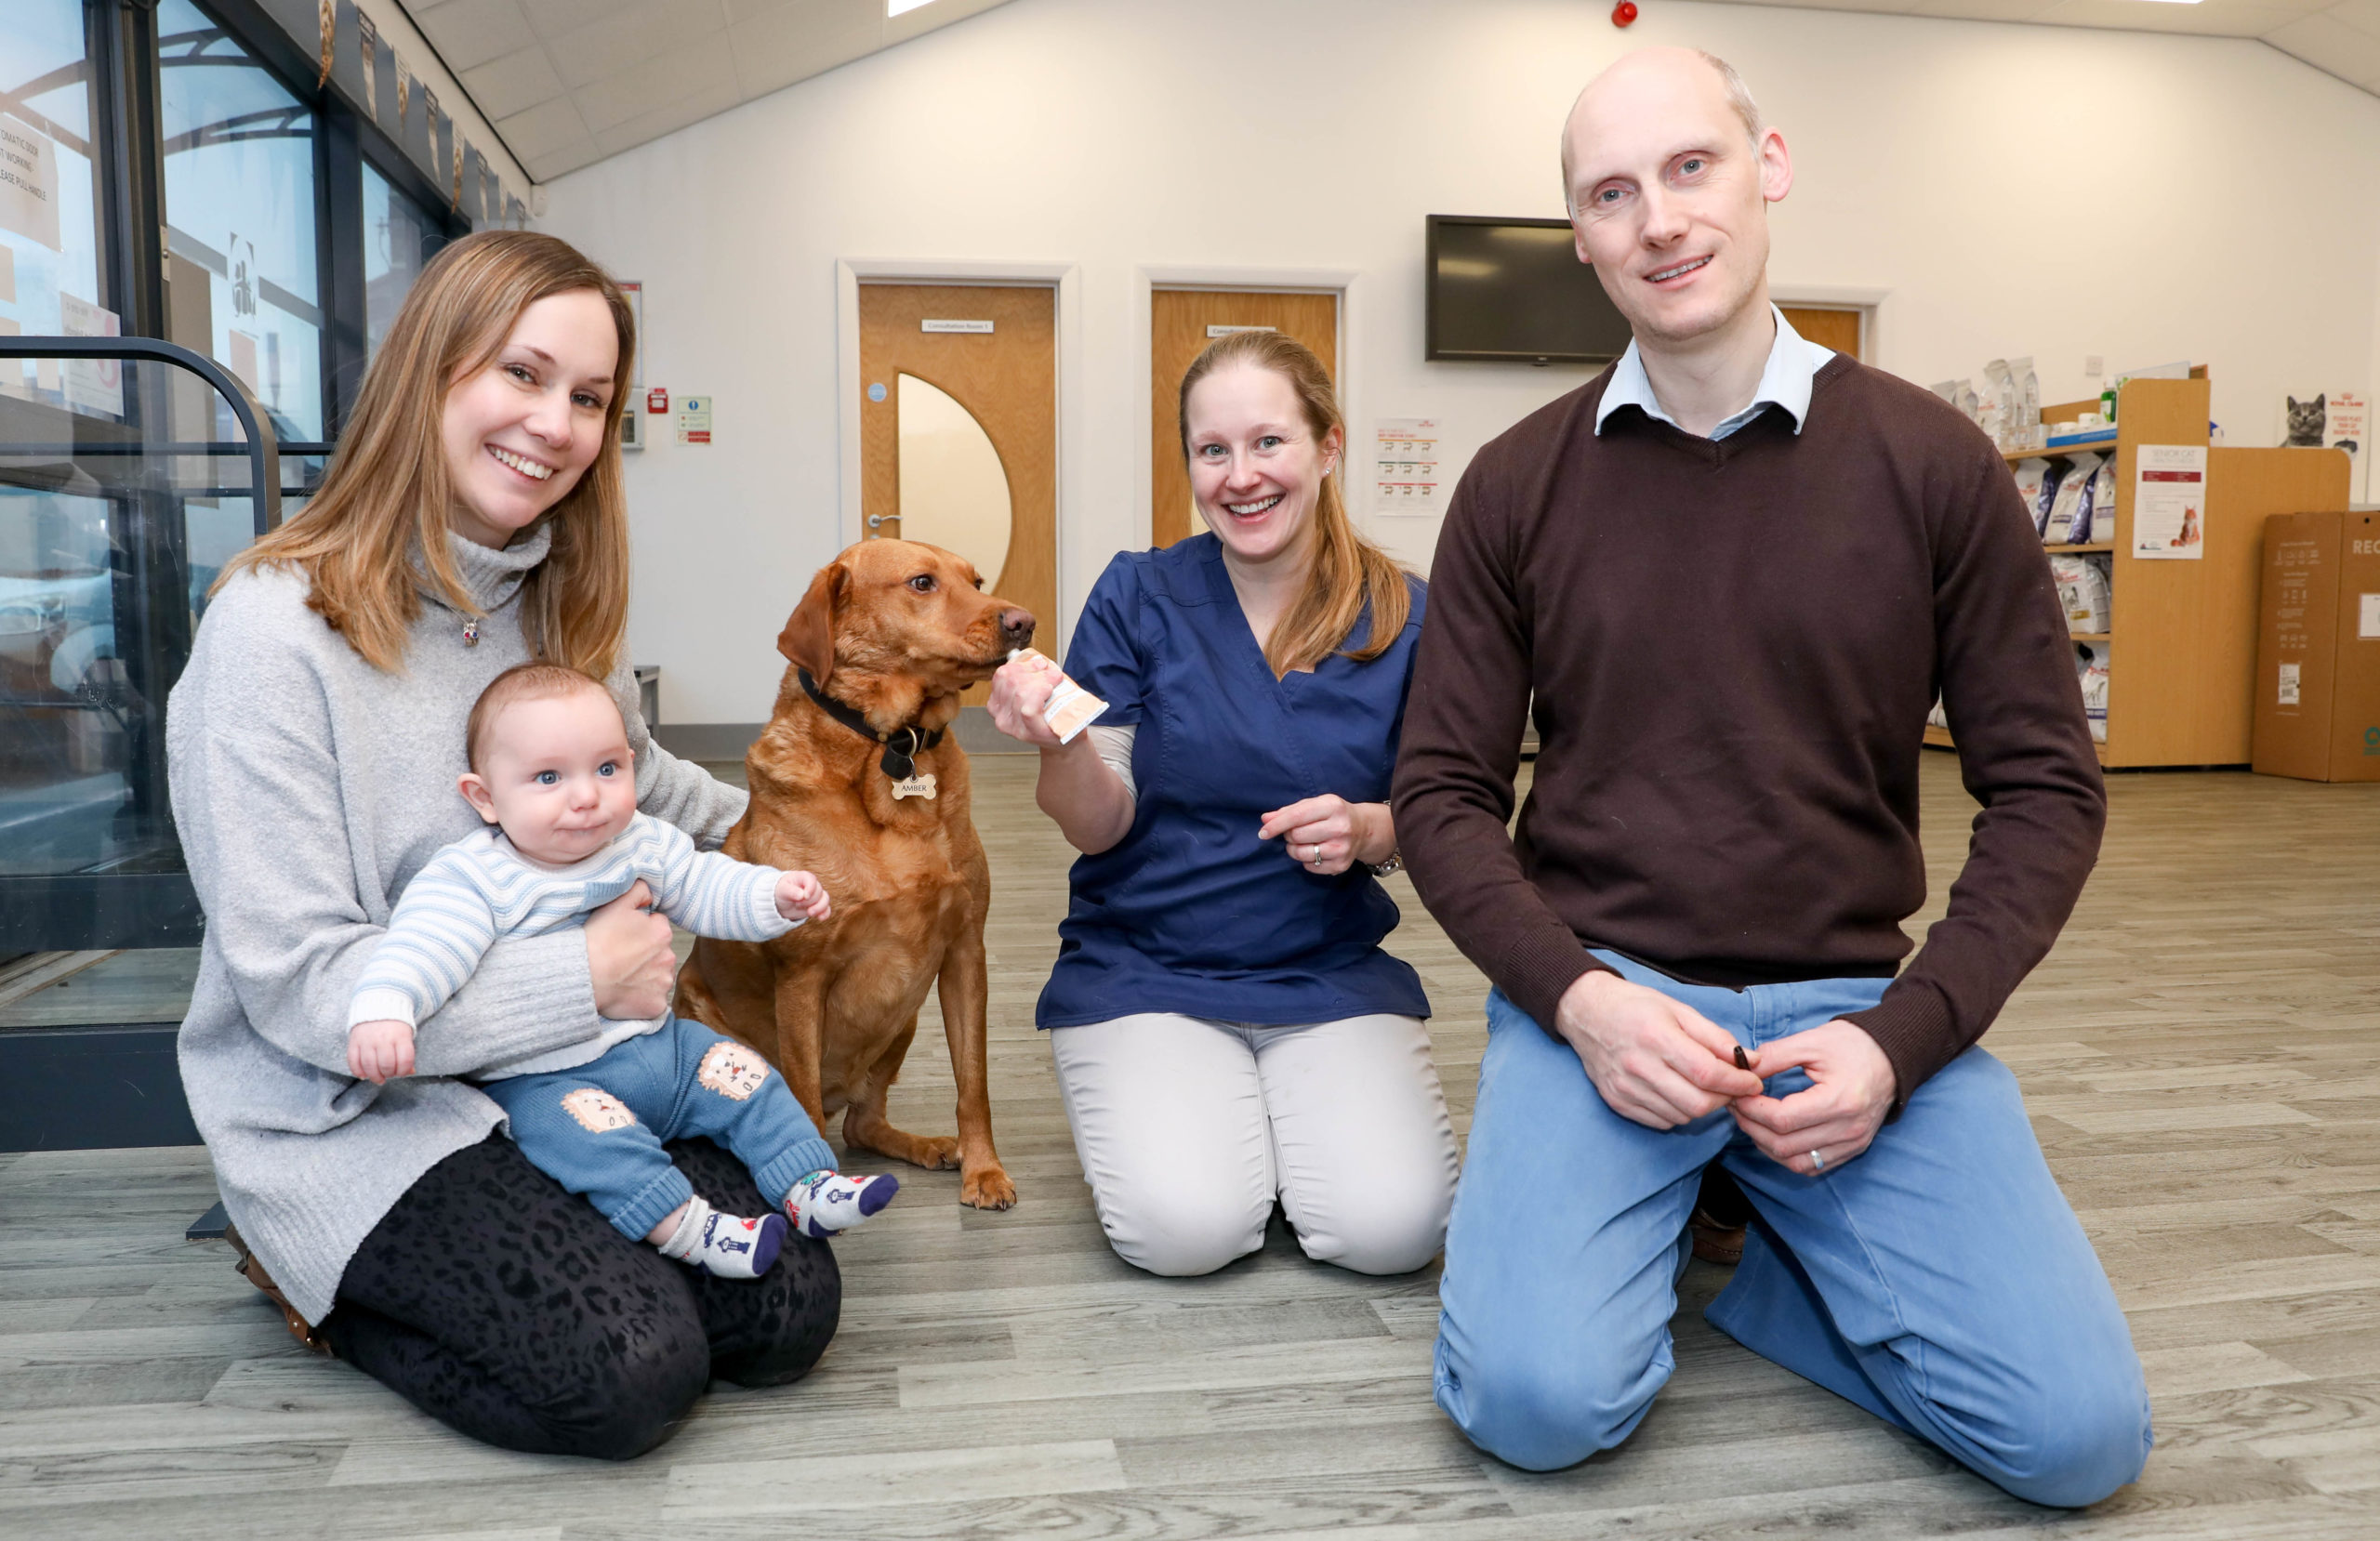 Acorn Veterinary Surgery in West Kirby
Kate Smith and son Elliott (4 months) with Amber the Labrador joined by Veterinary surgeons Rhiannon Mansell and Nick Whieldon. All delighted with the progress Amber has made.